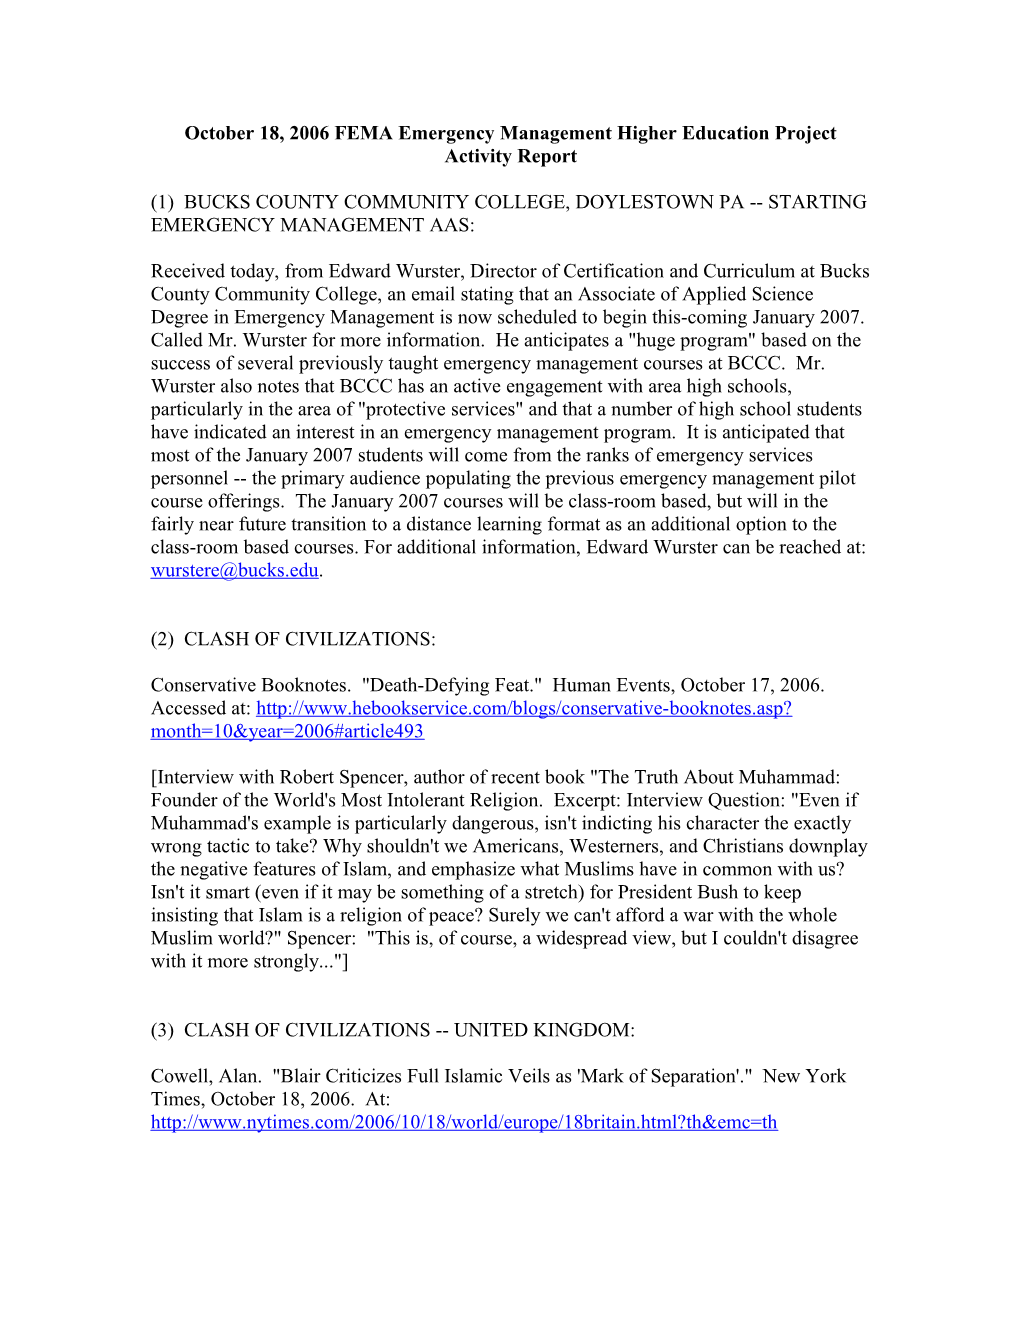 October 18, 2006 FEMA Emergency Management Higher Education Project Activity Report